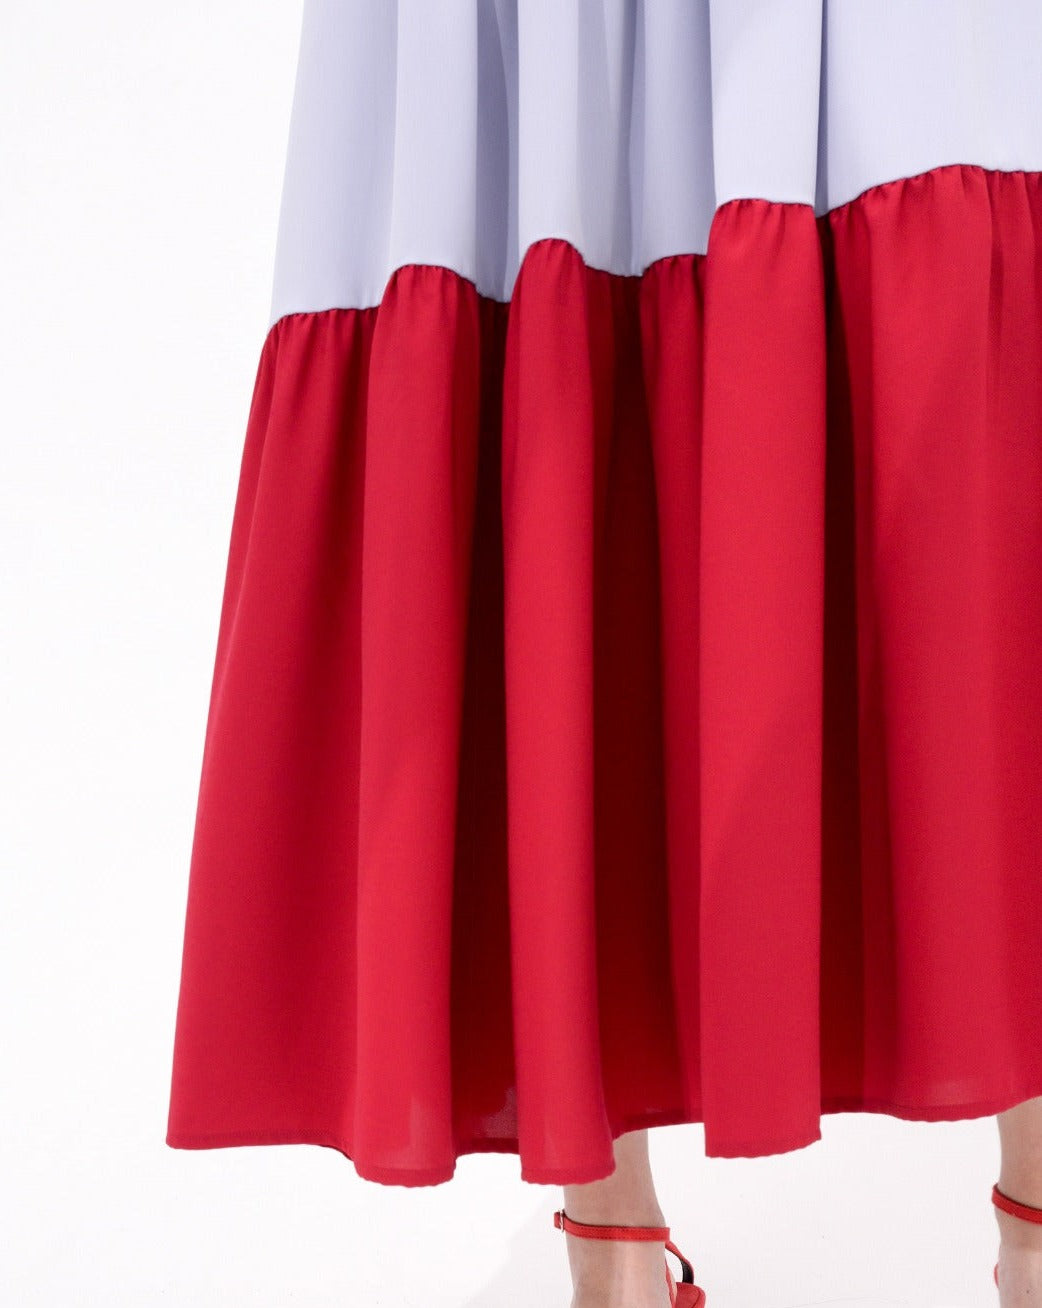 aalis MAISIE tiered midi skirt (Blue red)